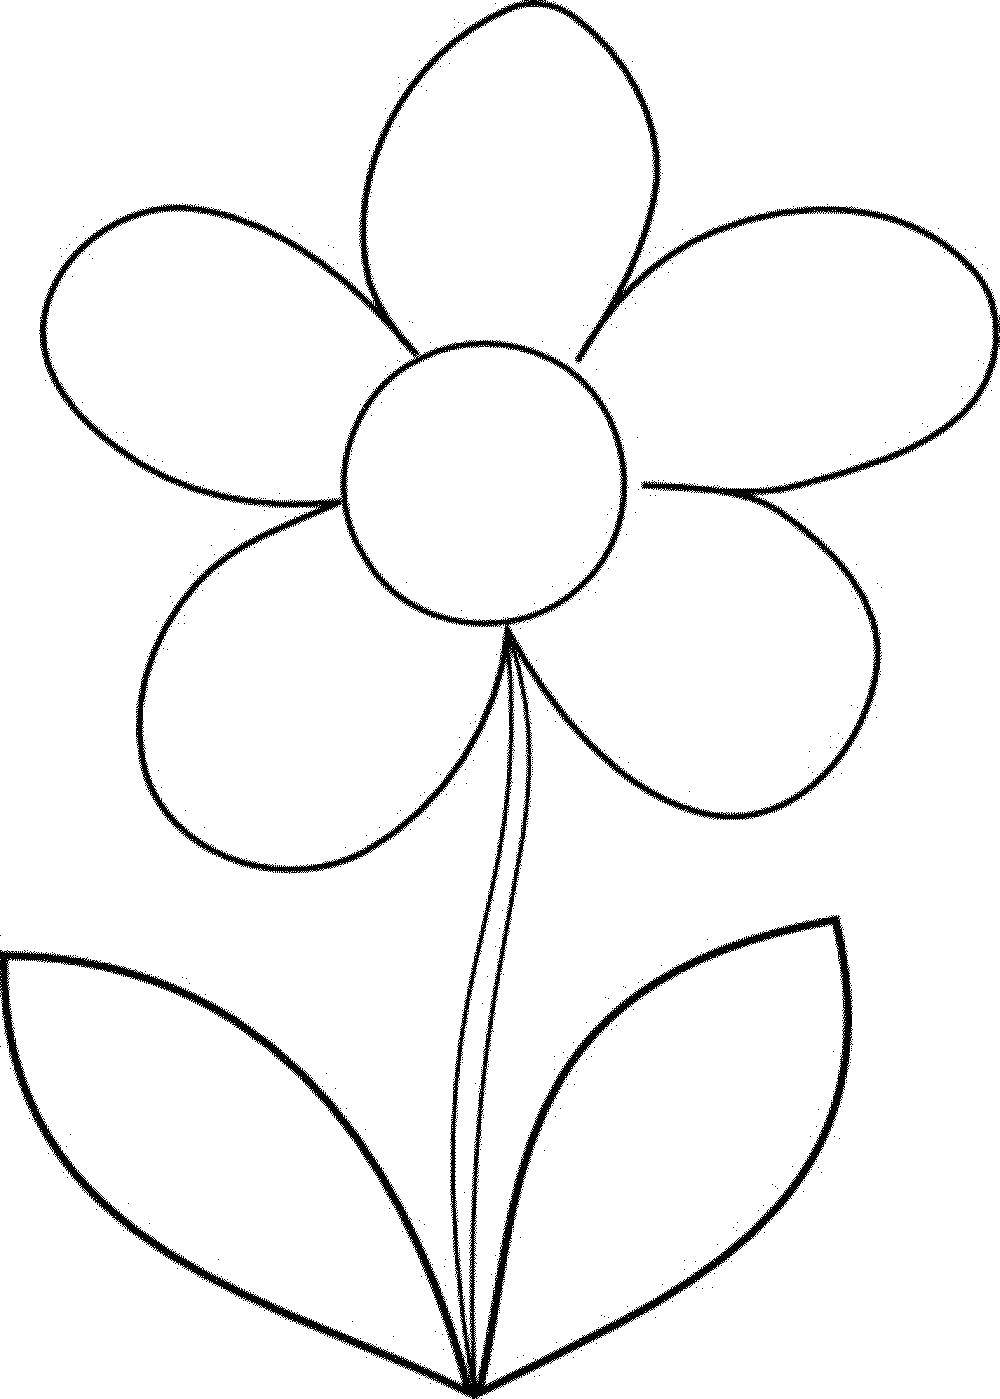 Coloring 5 petals. Category simple coloring. Tags:  Flowers.